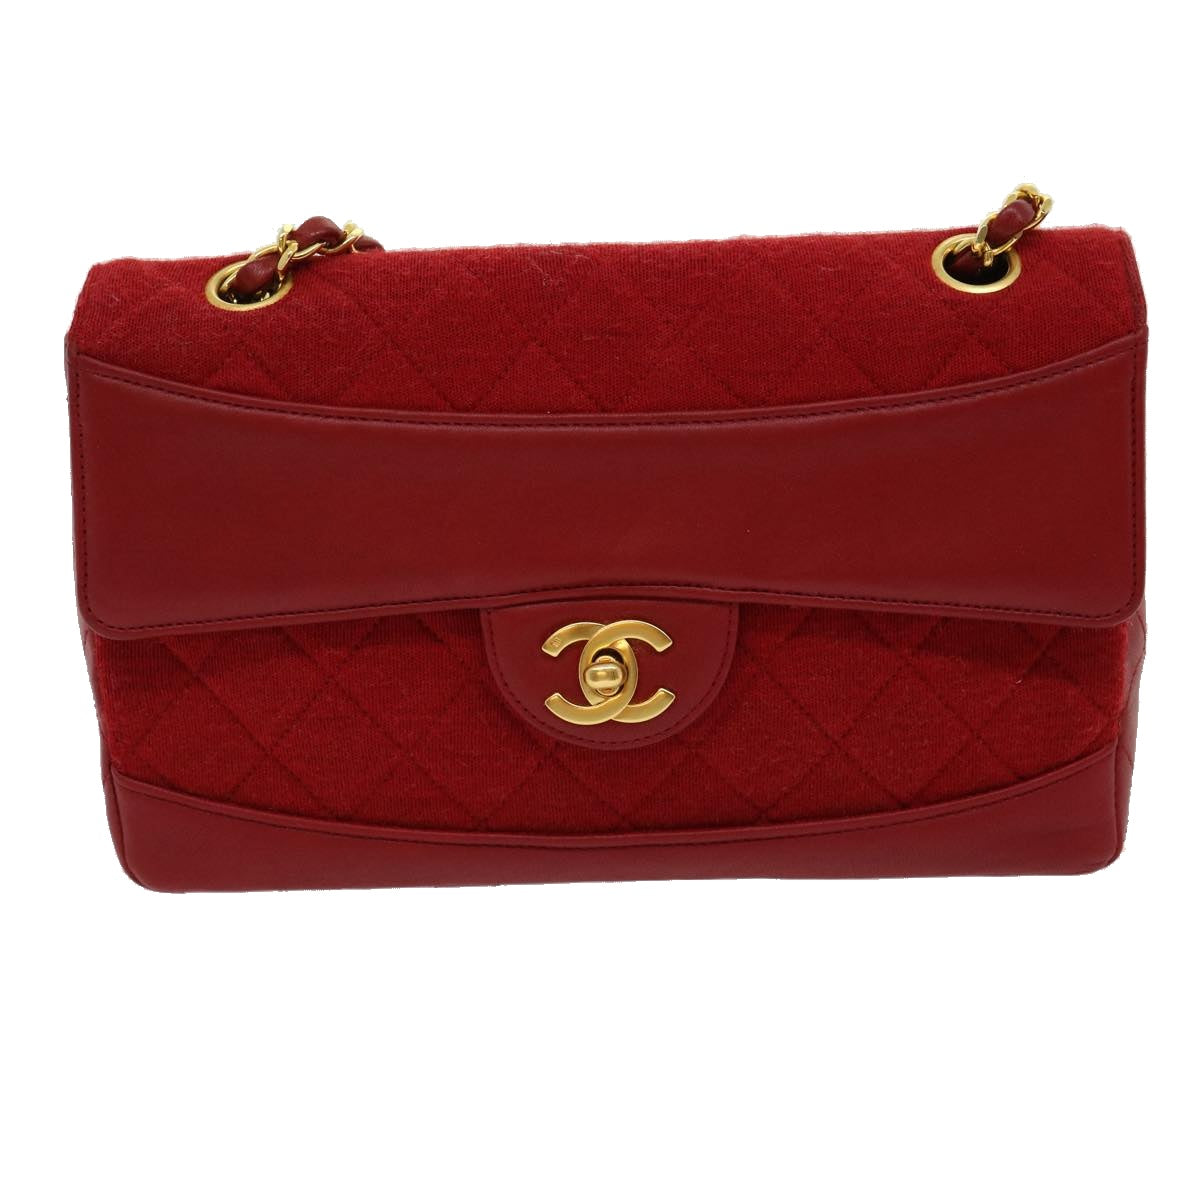 CHANEL Matelasse Double Chain Shoulder Bag Cotton Leather Red CC Auth 30896A